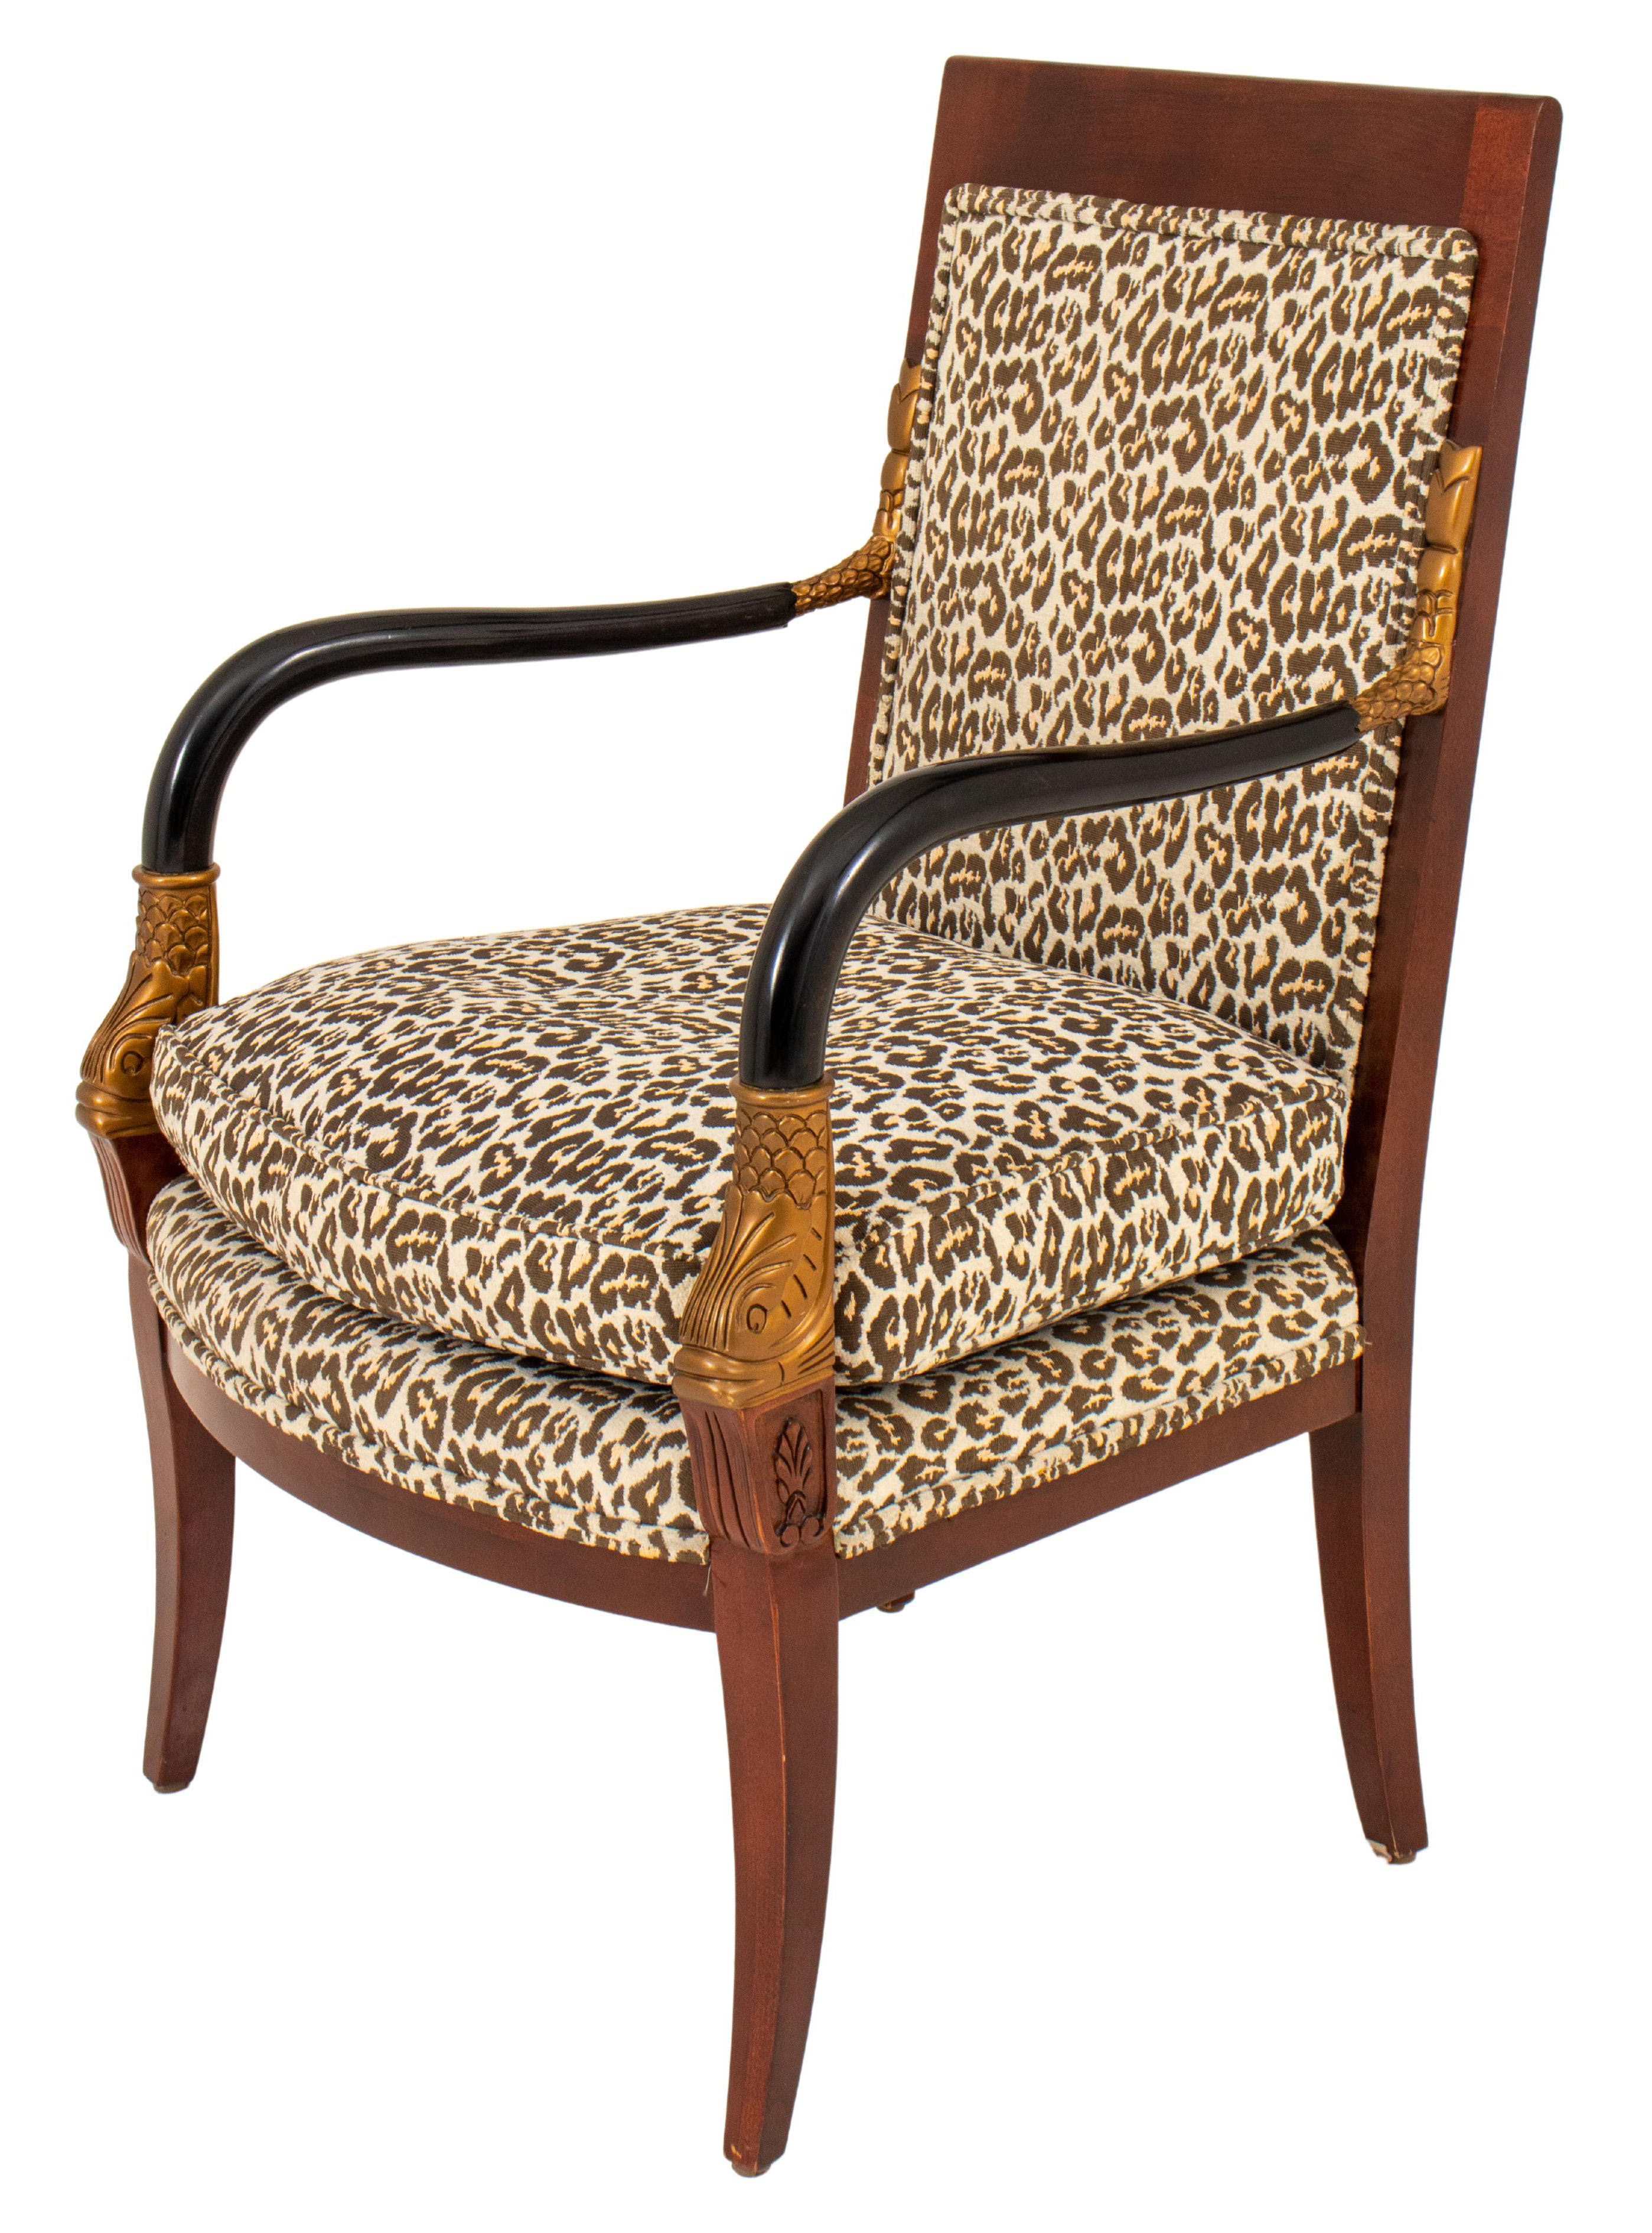 FRENCH CONSULAT STYLE ARM CHAIR 3ce82d